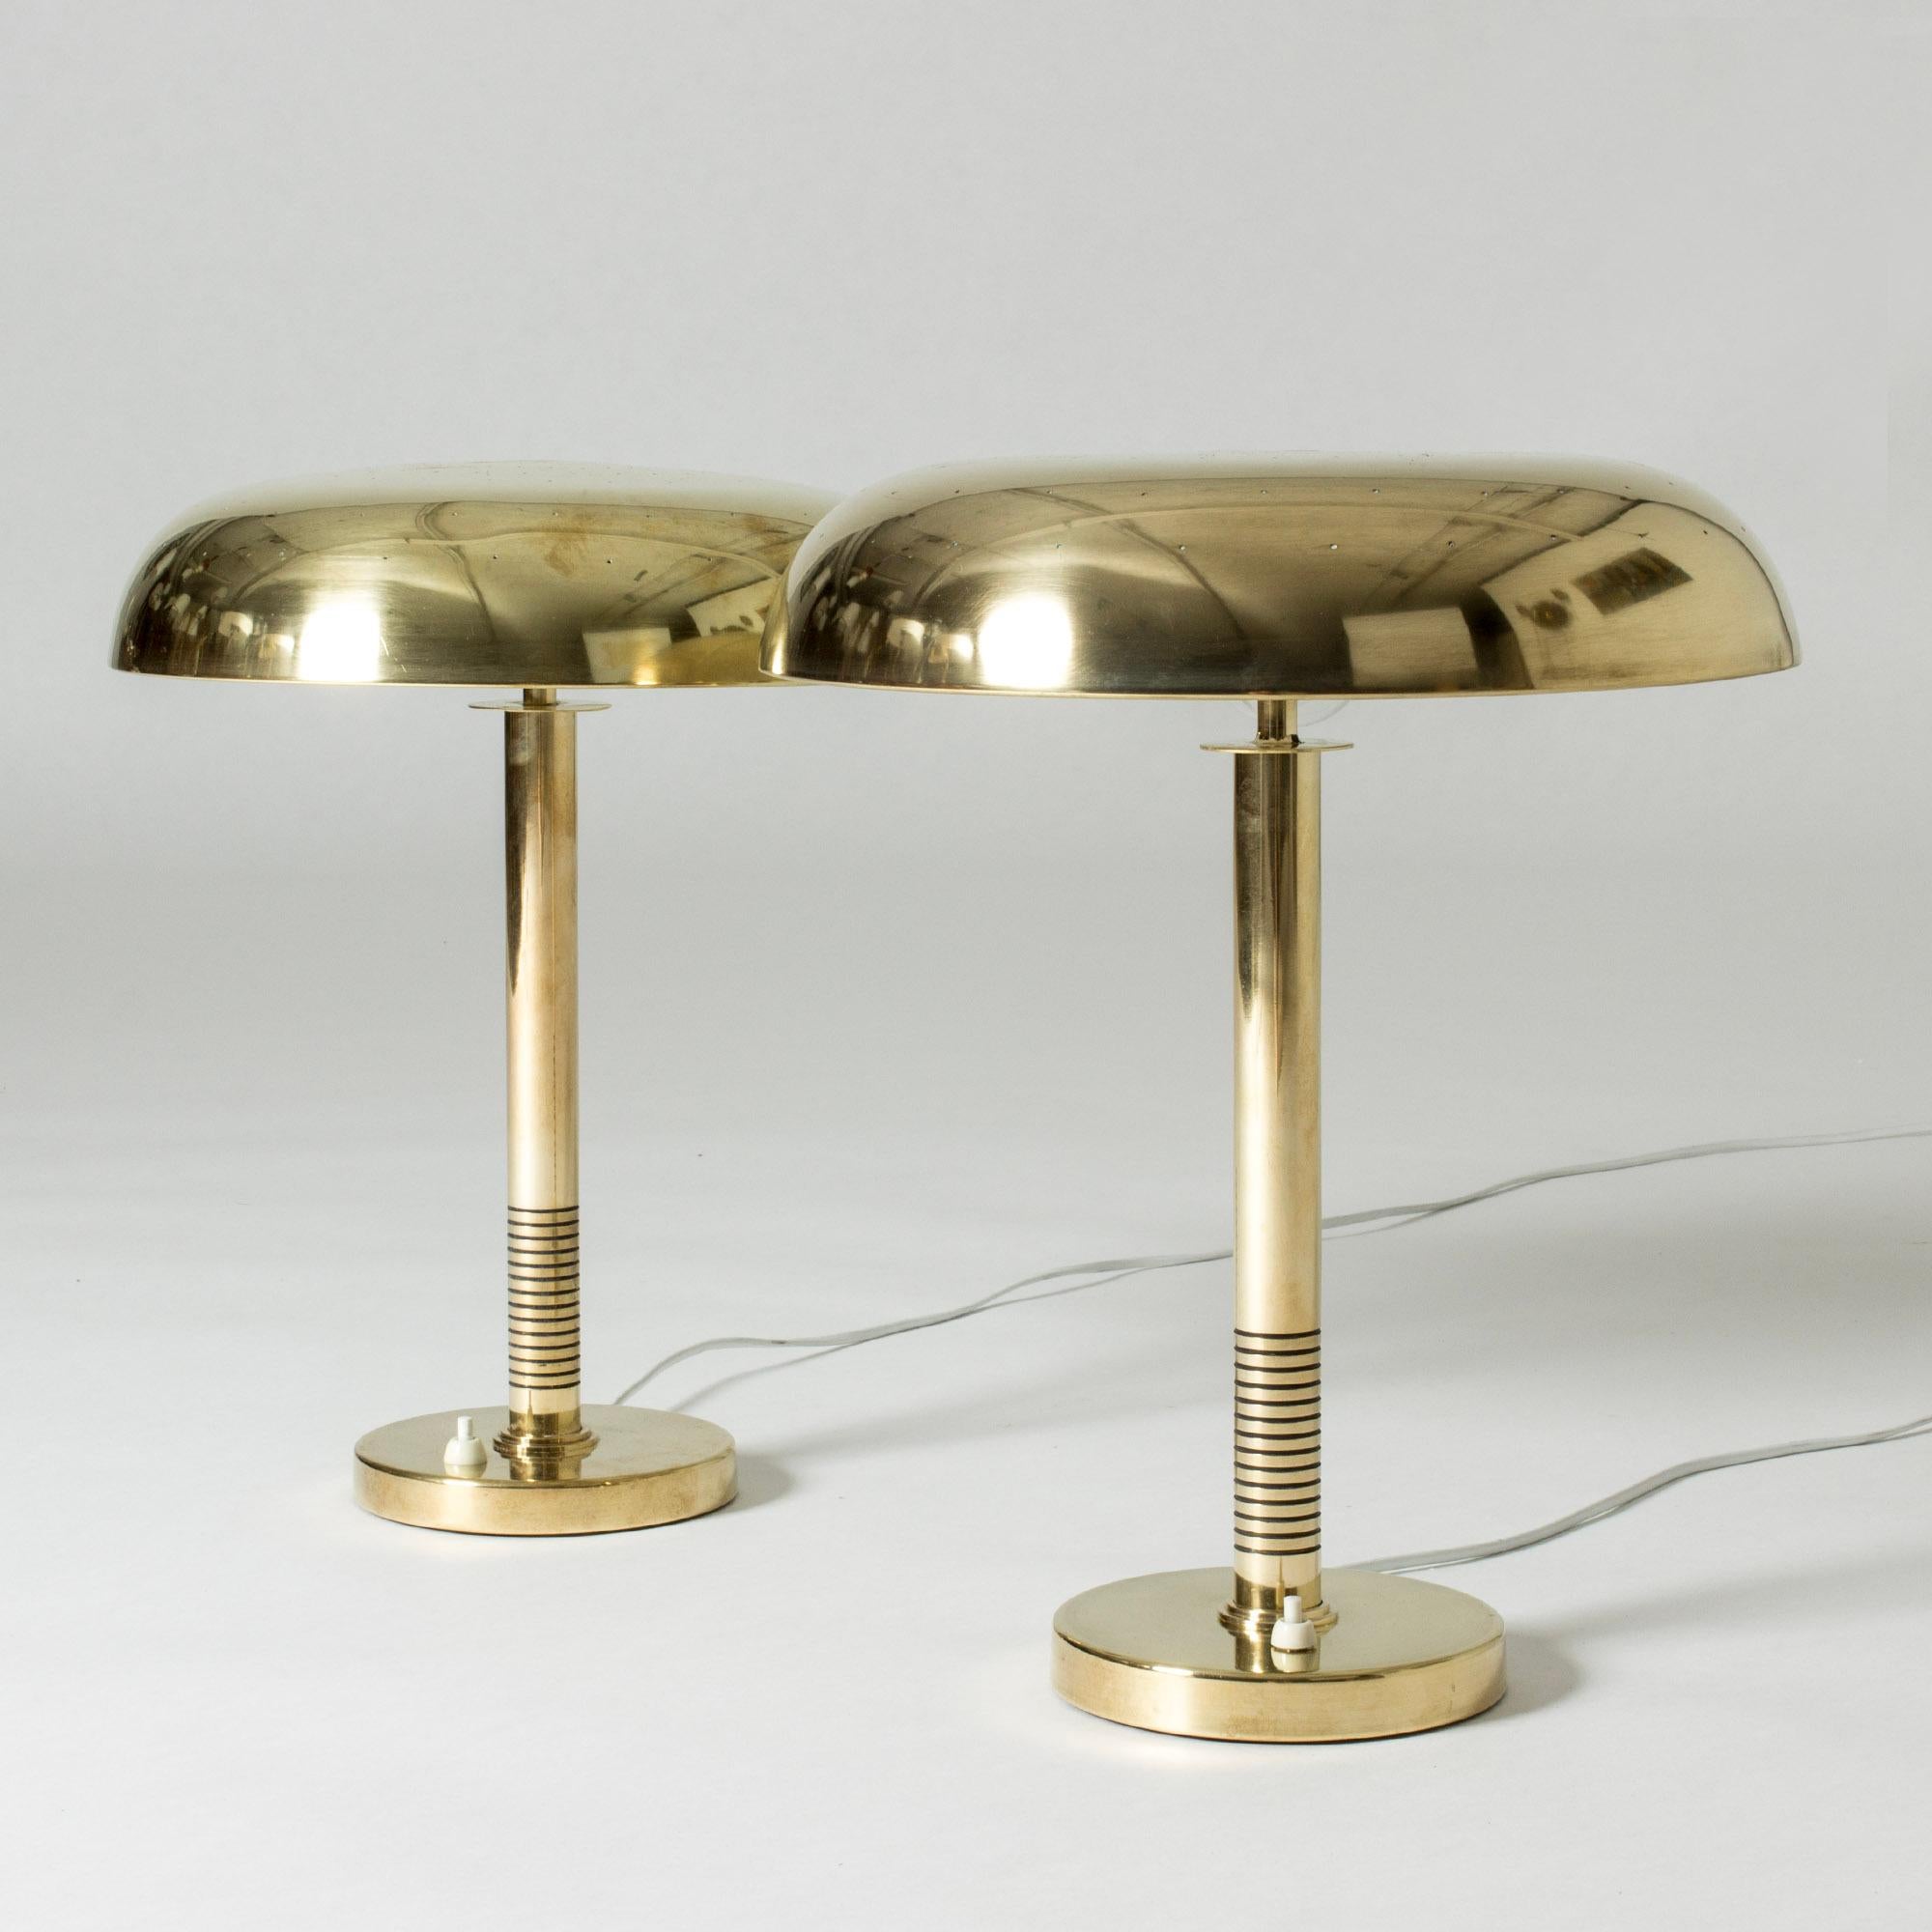 Pair of sleek table lamps from Boréns, made from brass. Wide brass shades with rounded forms, bases with elegant stripes.
